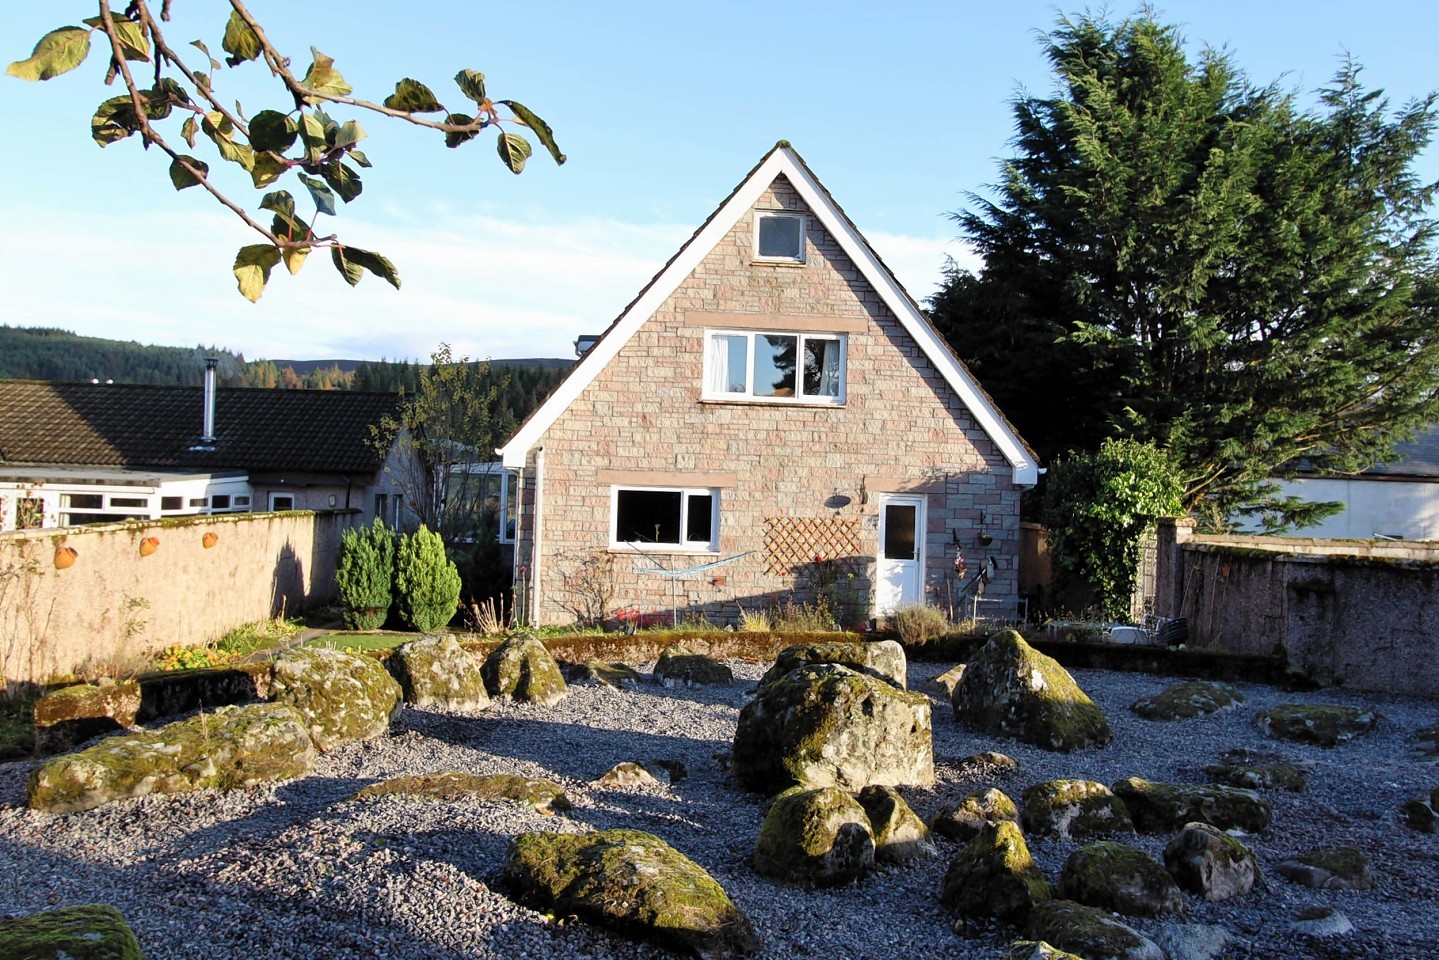 Stonehenge House near Inverness has a Pictish stone circle in the back garden